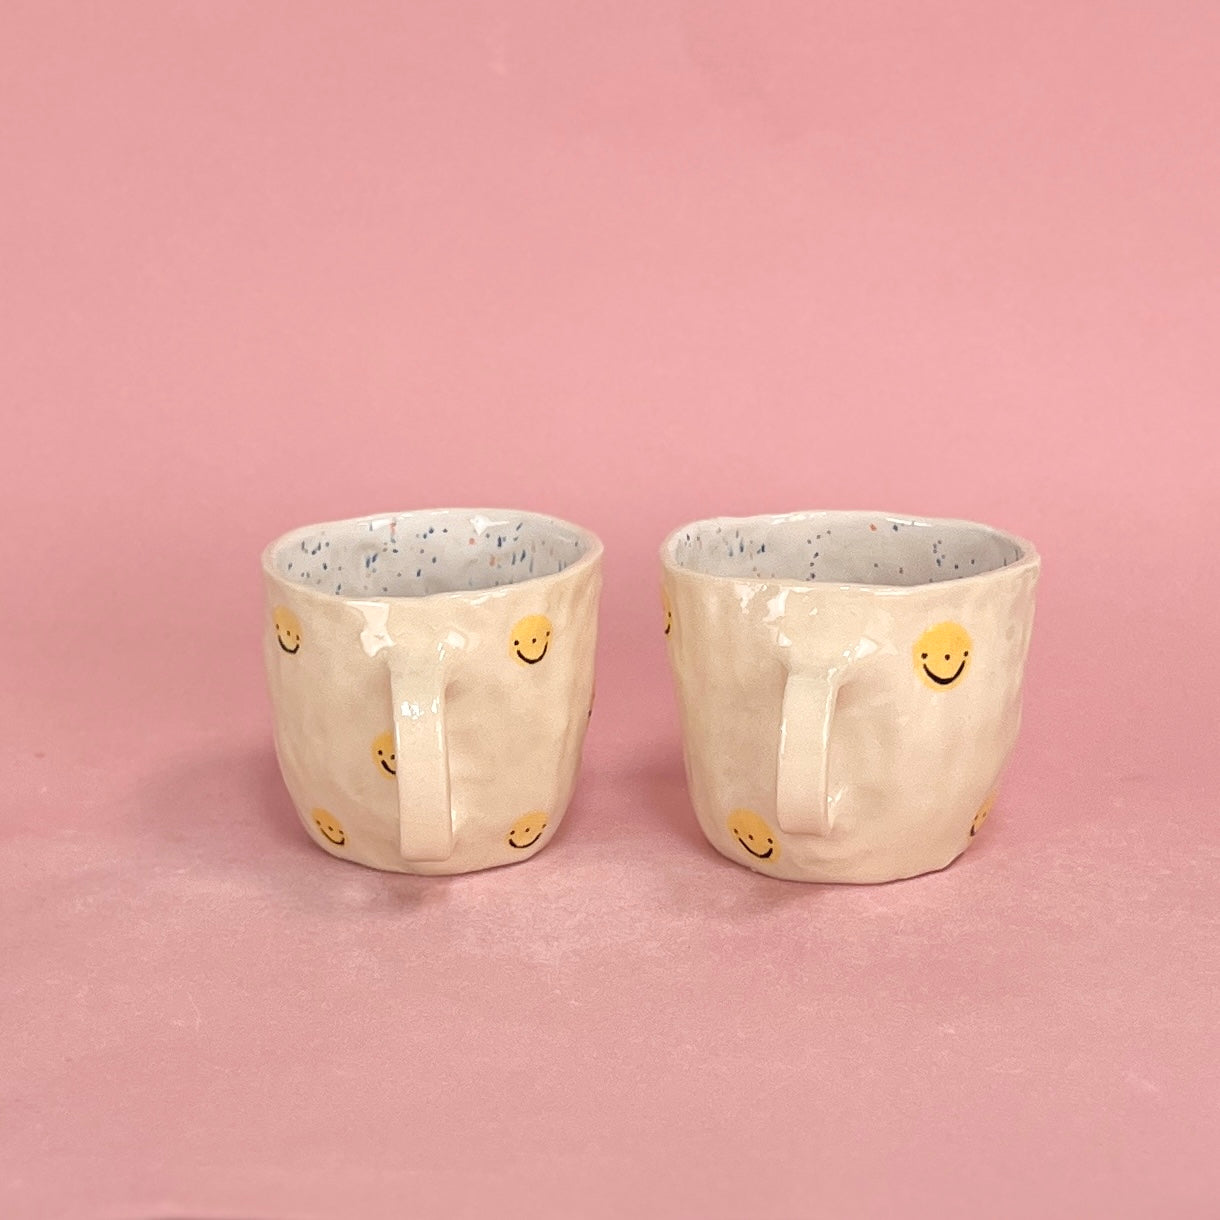 Smiley Speckle Mugs